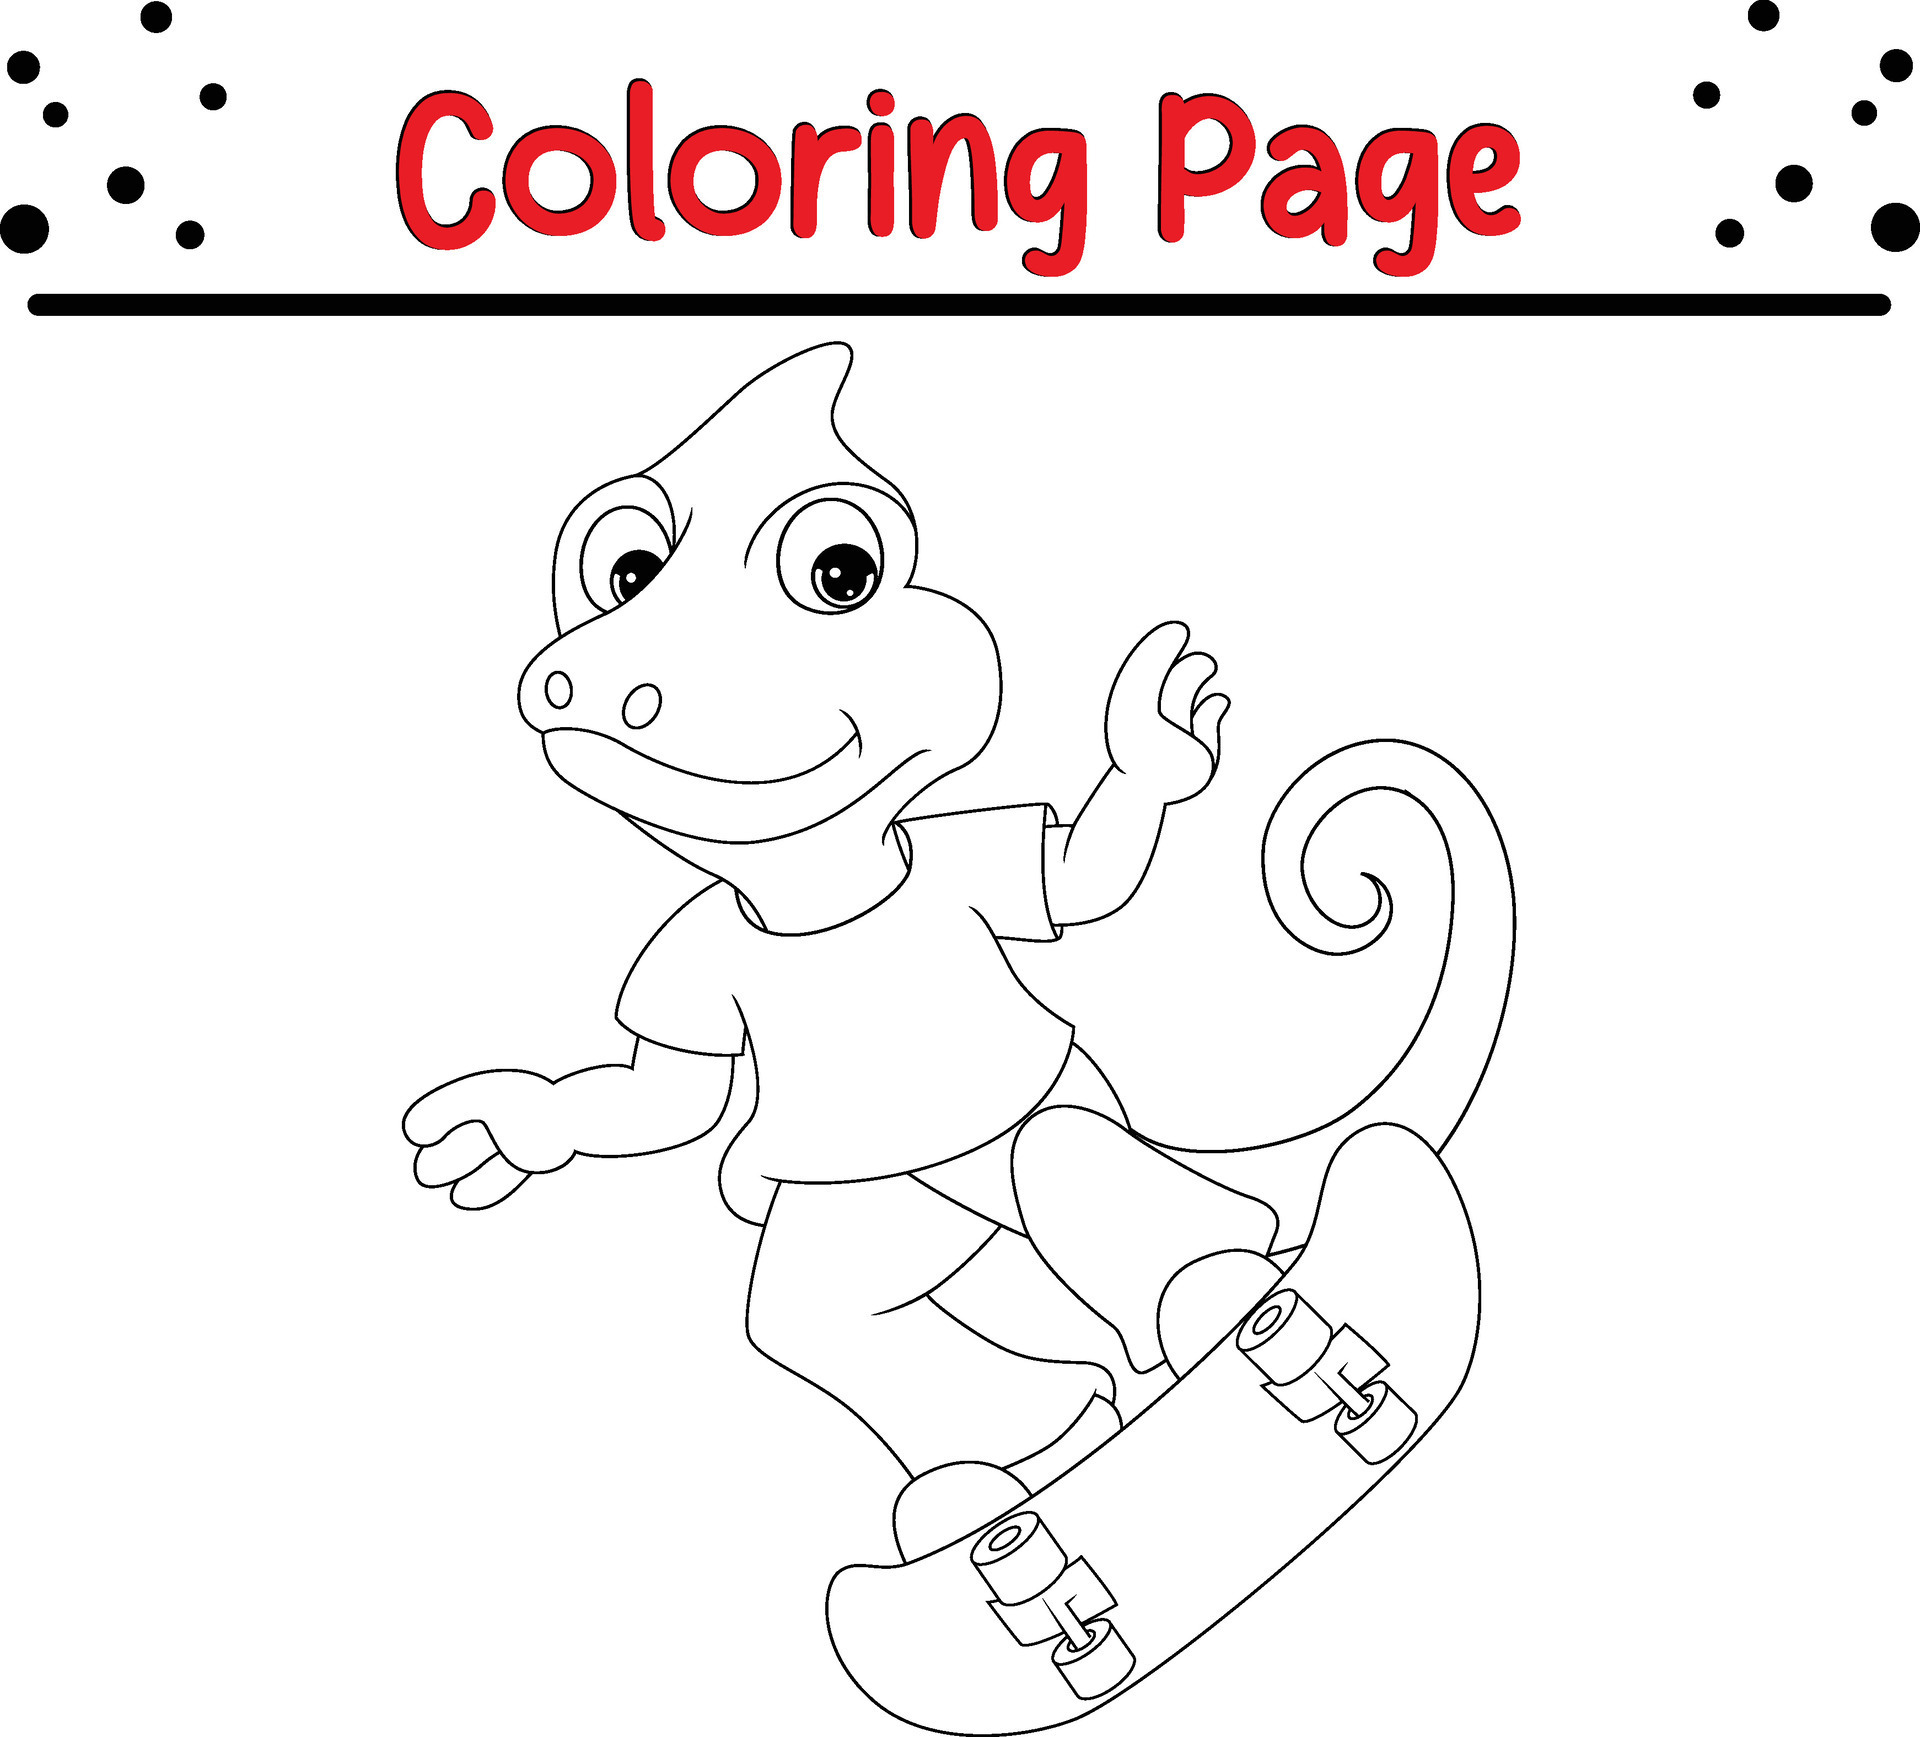 Lizard Coloring Pages 